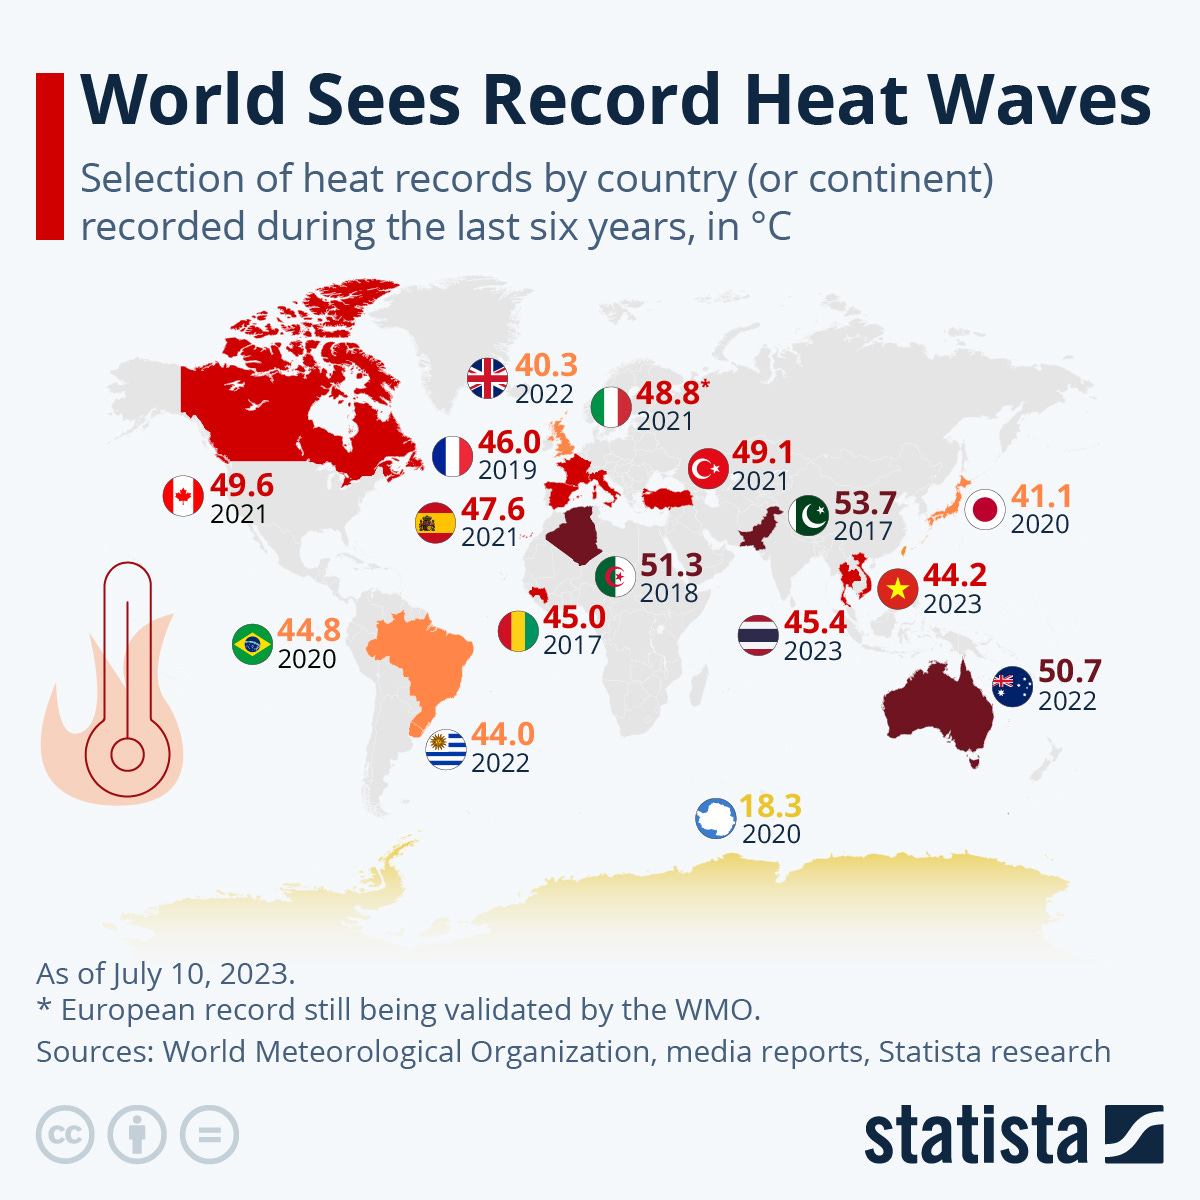 Selection of heat records by country or continent recorded during the last six years in °C by Statista: 49.6 in Canada (2021), 44.8 in Brazil (2020), 44.0 in Argentina (2022), 40.3 in the UK (2022), 46.0 in France (2019), 47.6 in Spain (2021), 48.8* in Italy (2021), 45.0 in Guinea (2017), 51.3 in Algeria (2018), 49.1 in Turkey (2021), 53.7 in Pakistan (2017), 45.4 in Thailand (2023), 44.2 in Vietnam (2023), 41.1 in Japan (2020), and 50.7 in Australia (2022). As of July 10, 2023. *European record still being validated by the WMO. Sources: World Meteorological Organization, media reports, and Statista research.